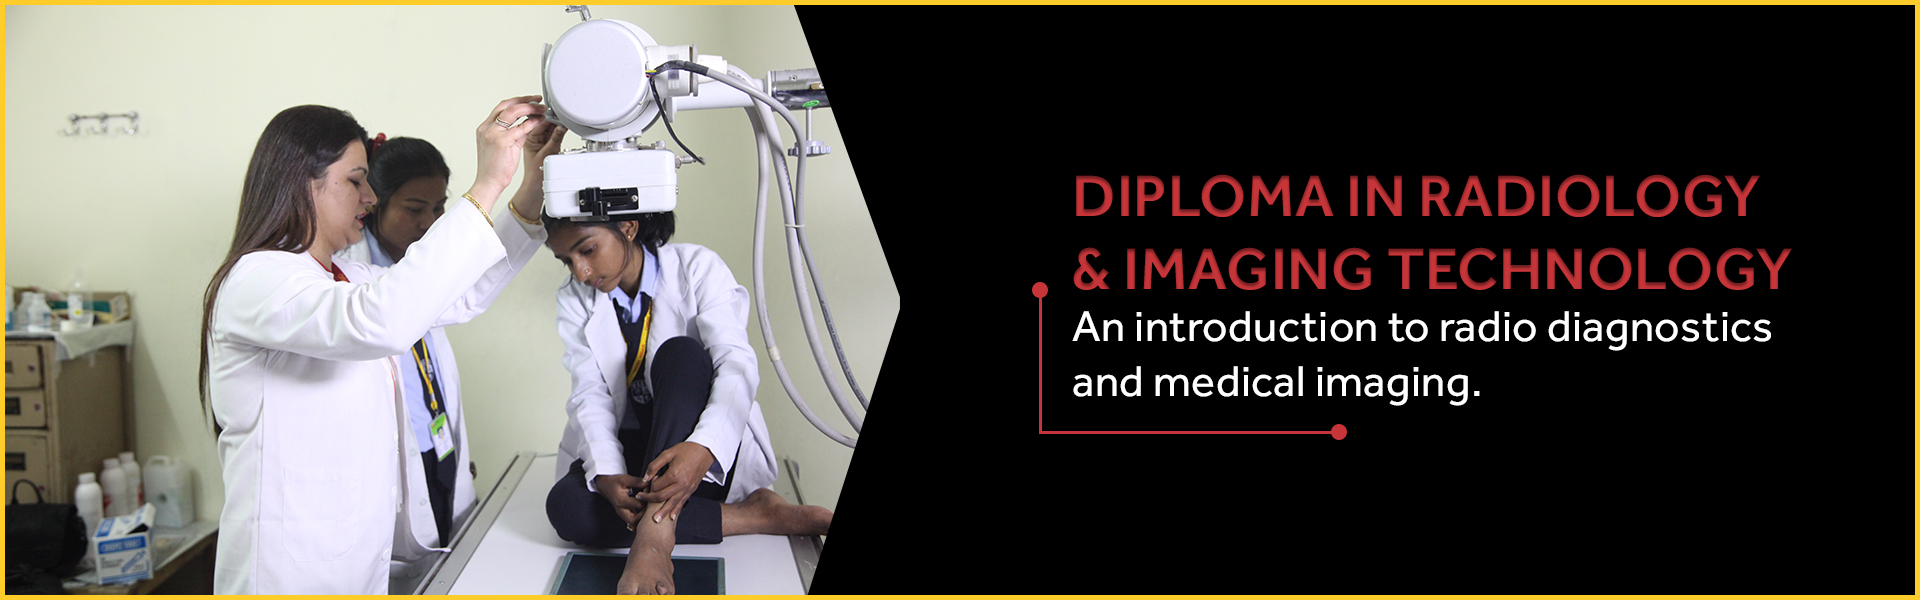 Diploma in Radiology & Imaging Technology Course/College in Haryana